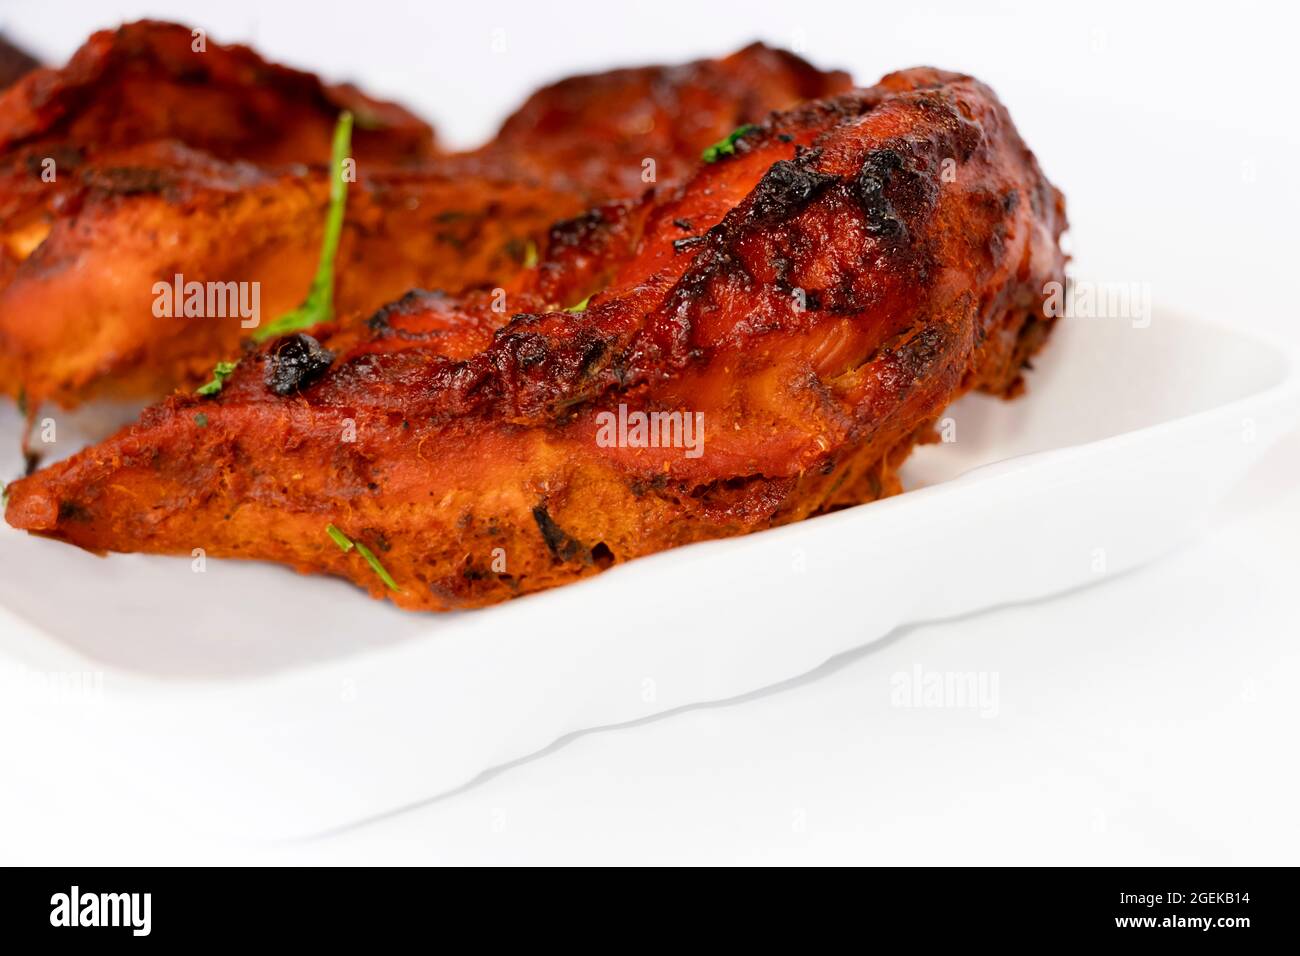 Closeup Image Of Kerala Style Chicken Fry In White Background. Side View, Shallow Depth Of Field Stock Photo